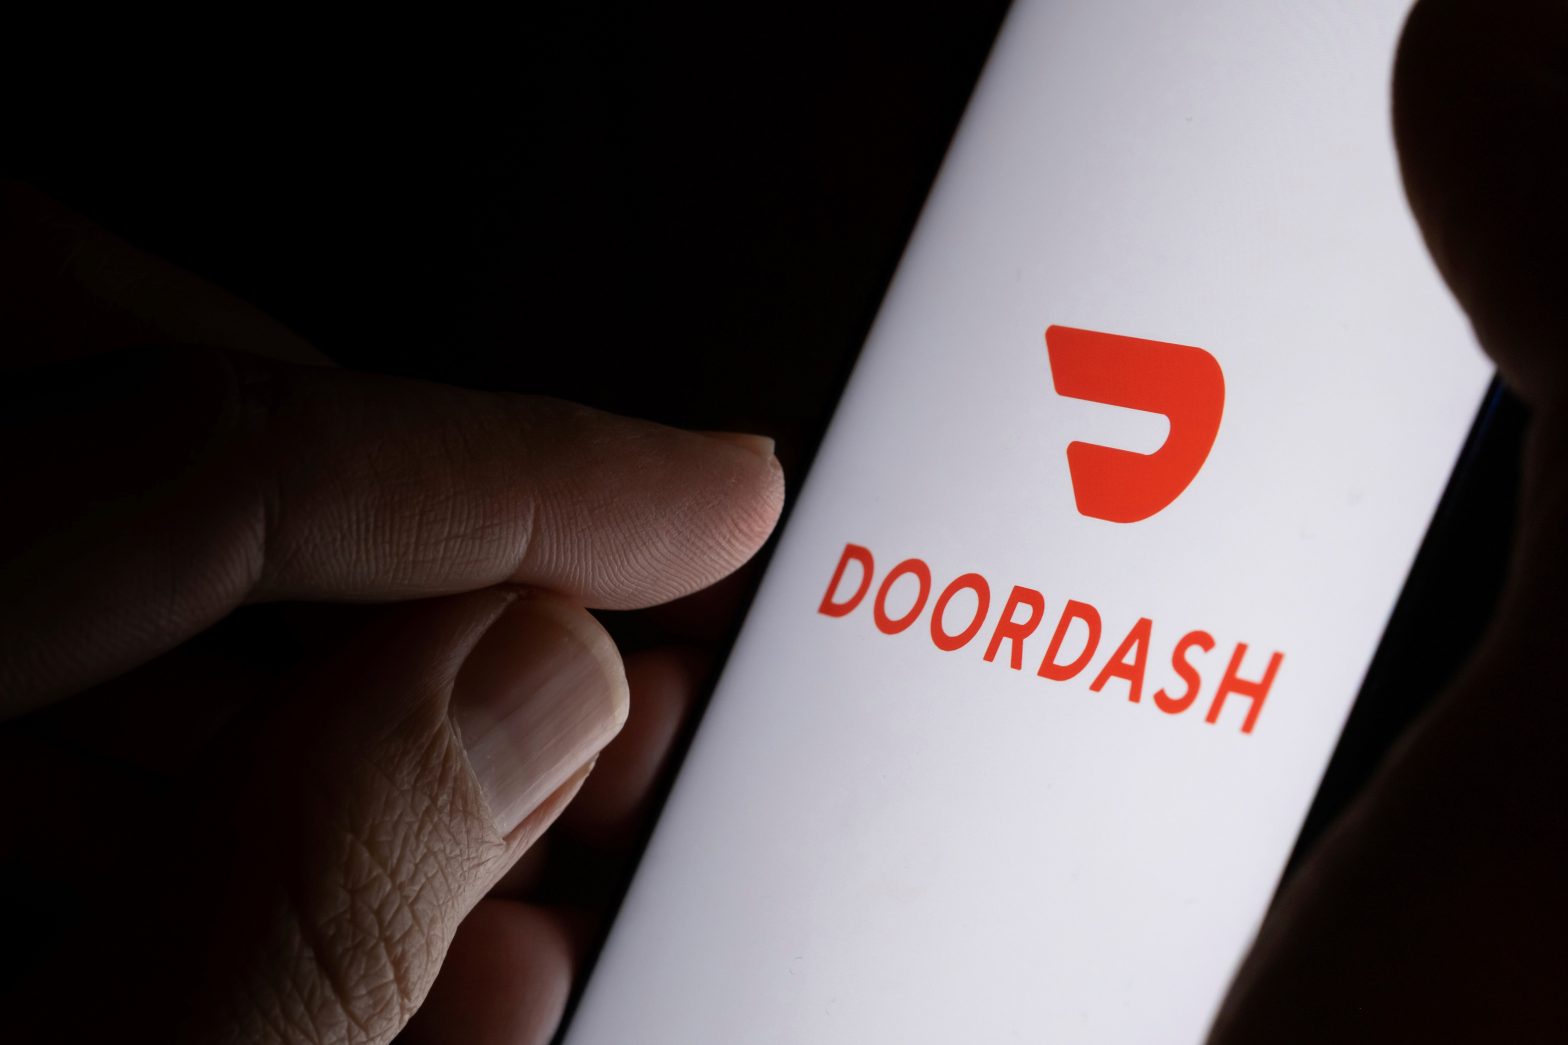 Doordash company logo on a mobile phone screen. News - Jail guard Amara Brown admits to DoorDash delivery for inmate